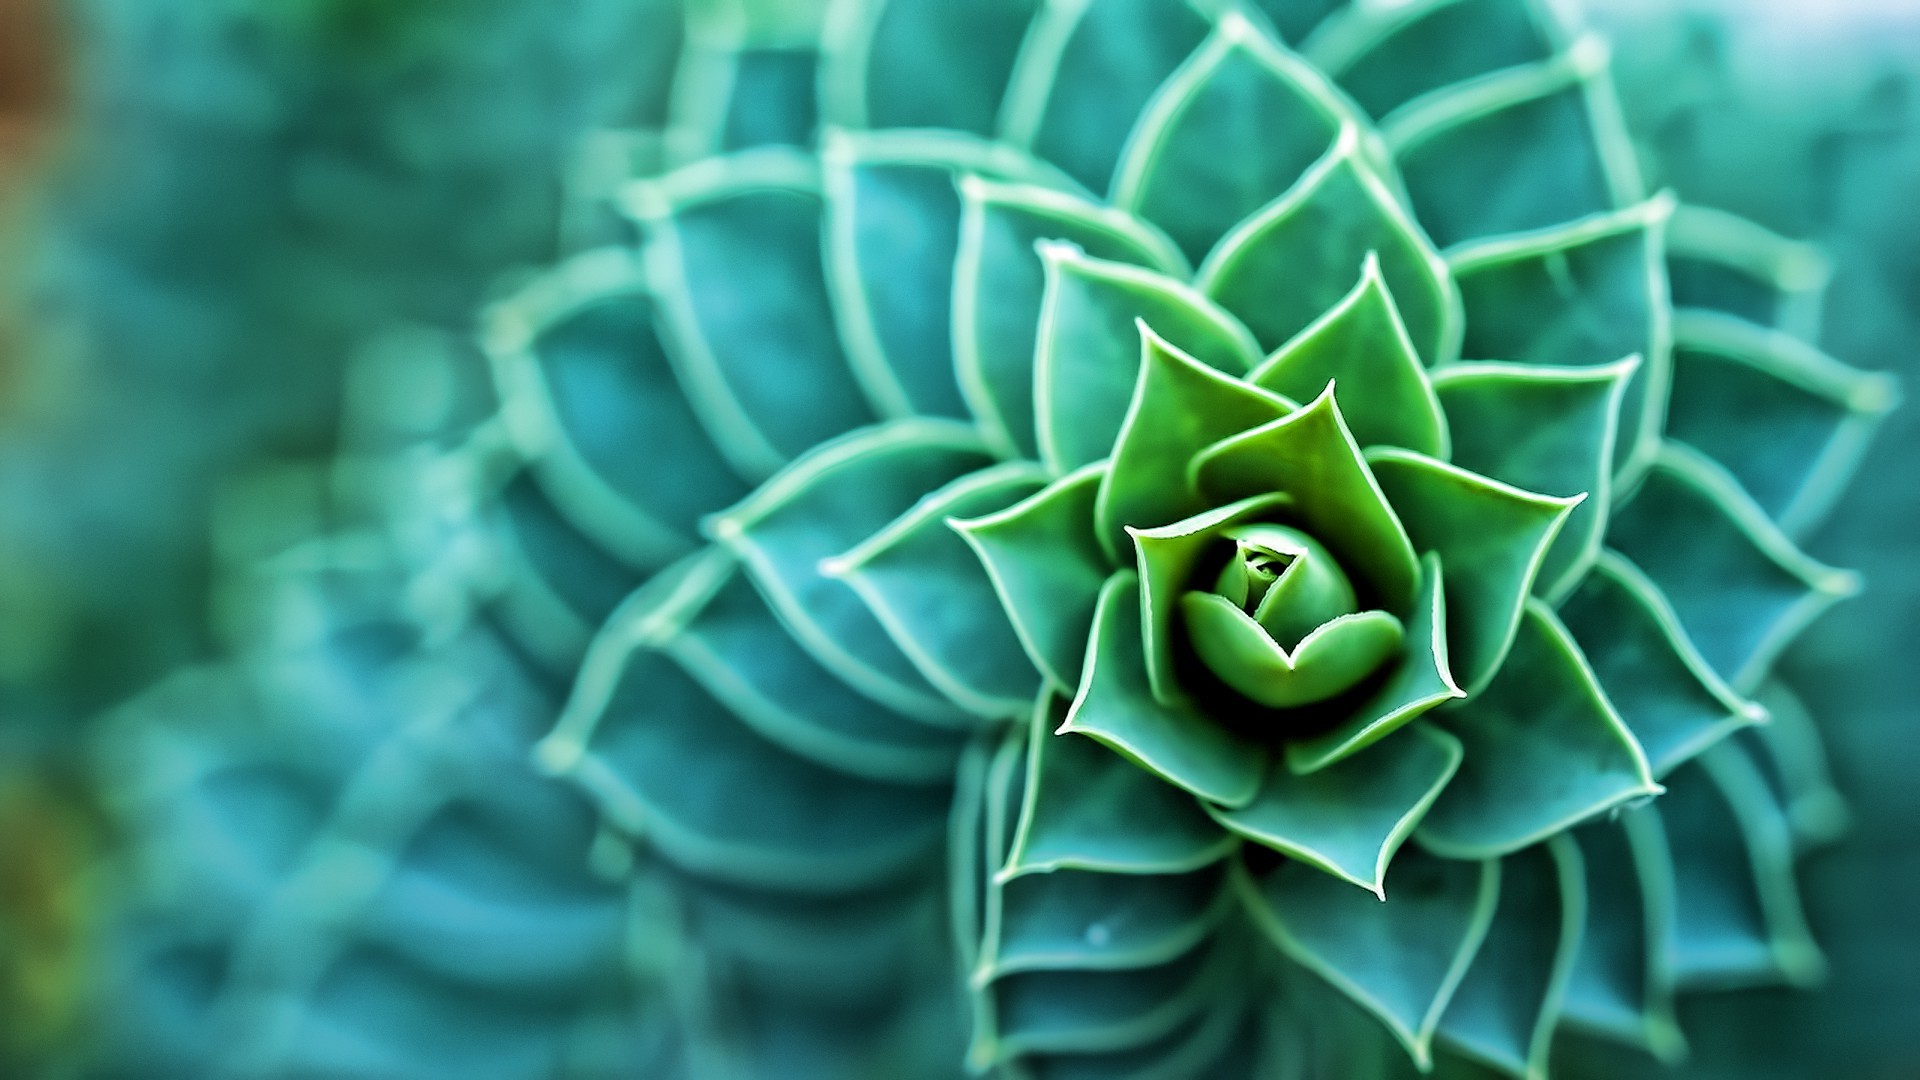 succulent wallpaper for home